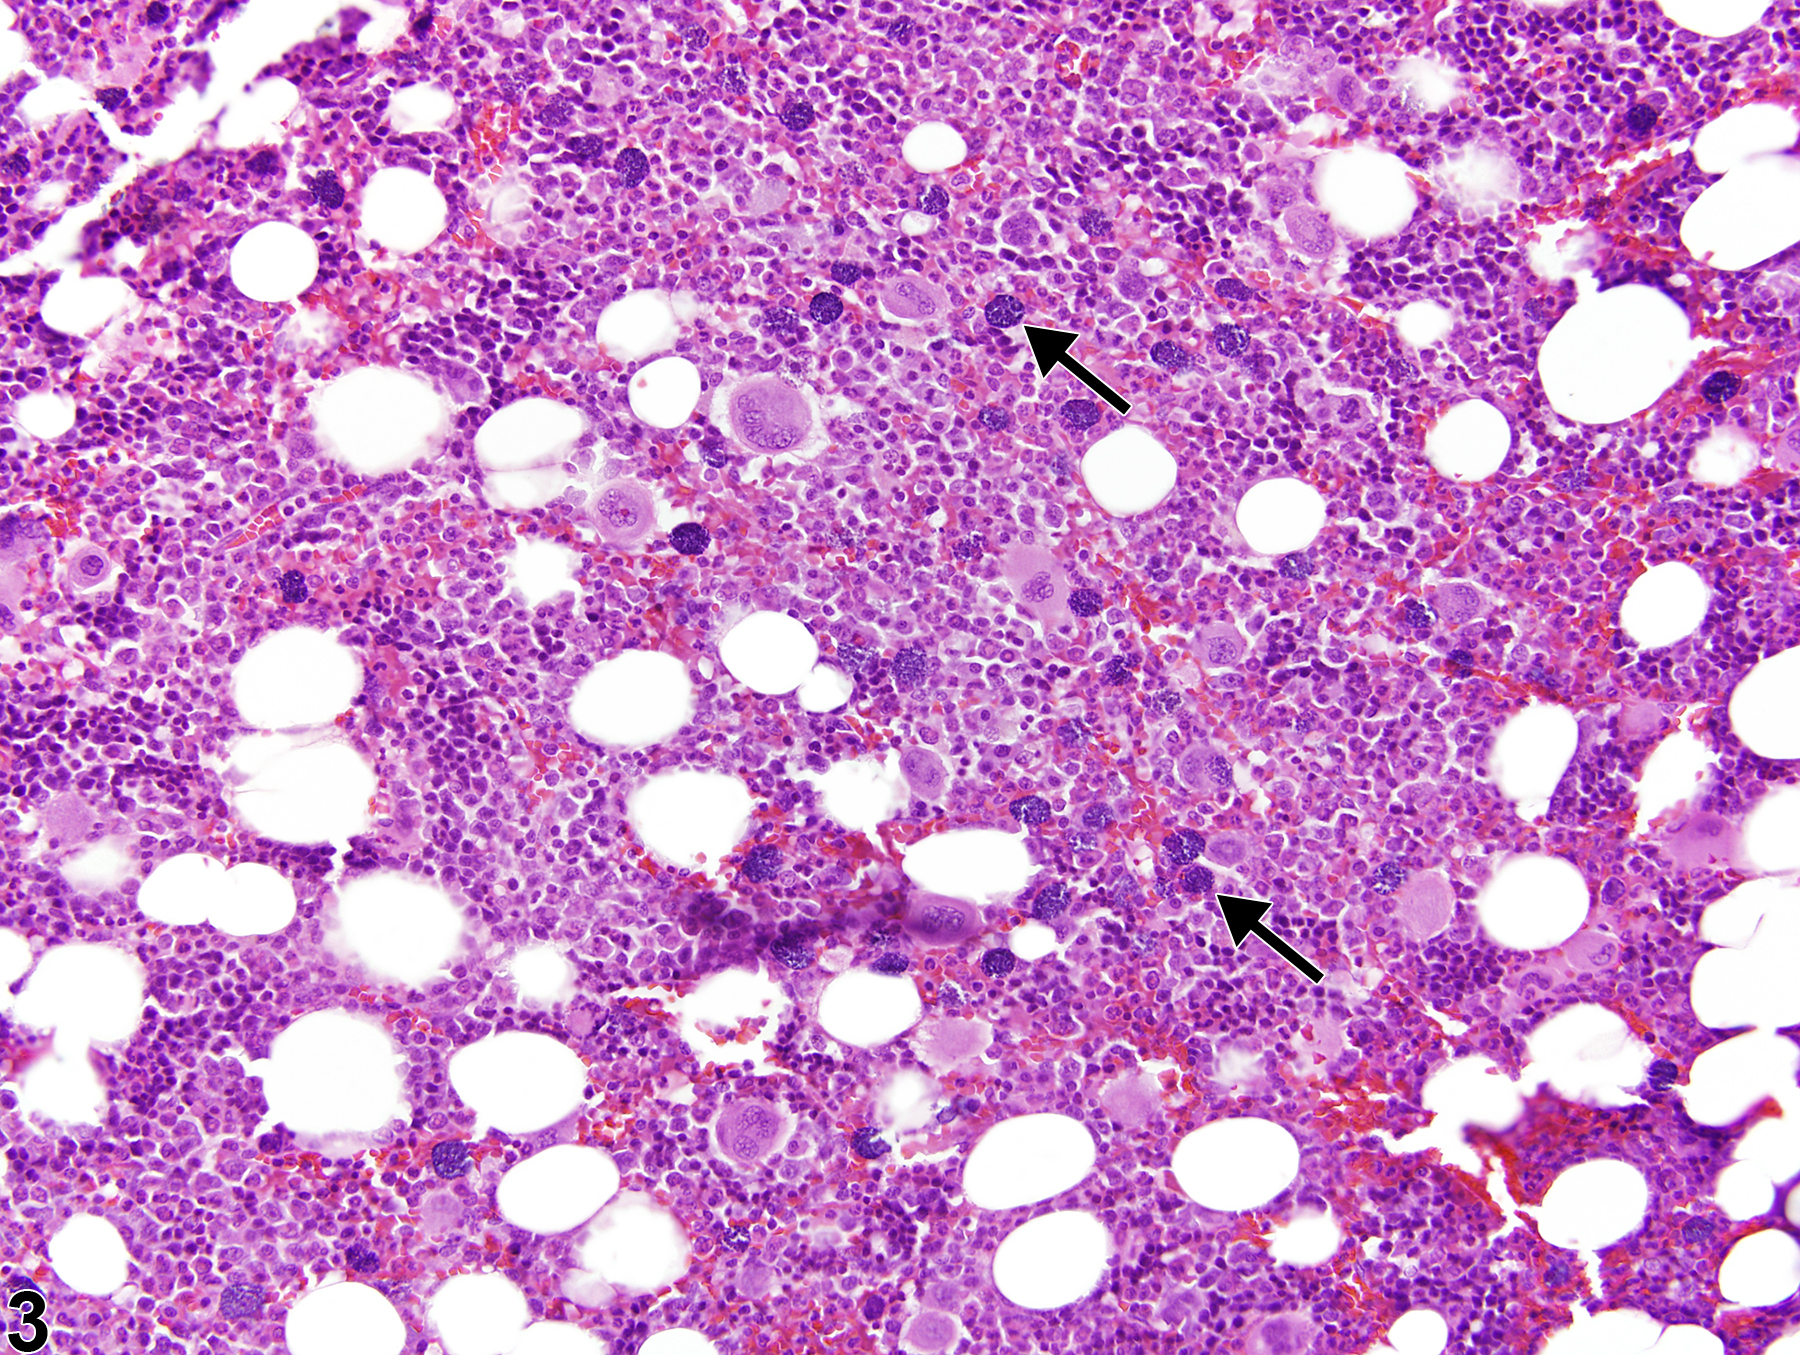 Image of infiltration cellular, mast cell in the bone marrow from a male F344/N rat in a chronic study